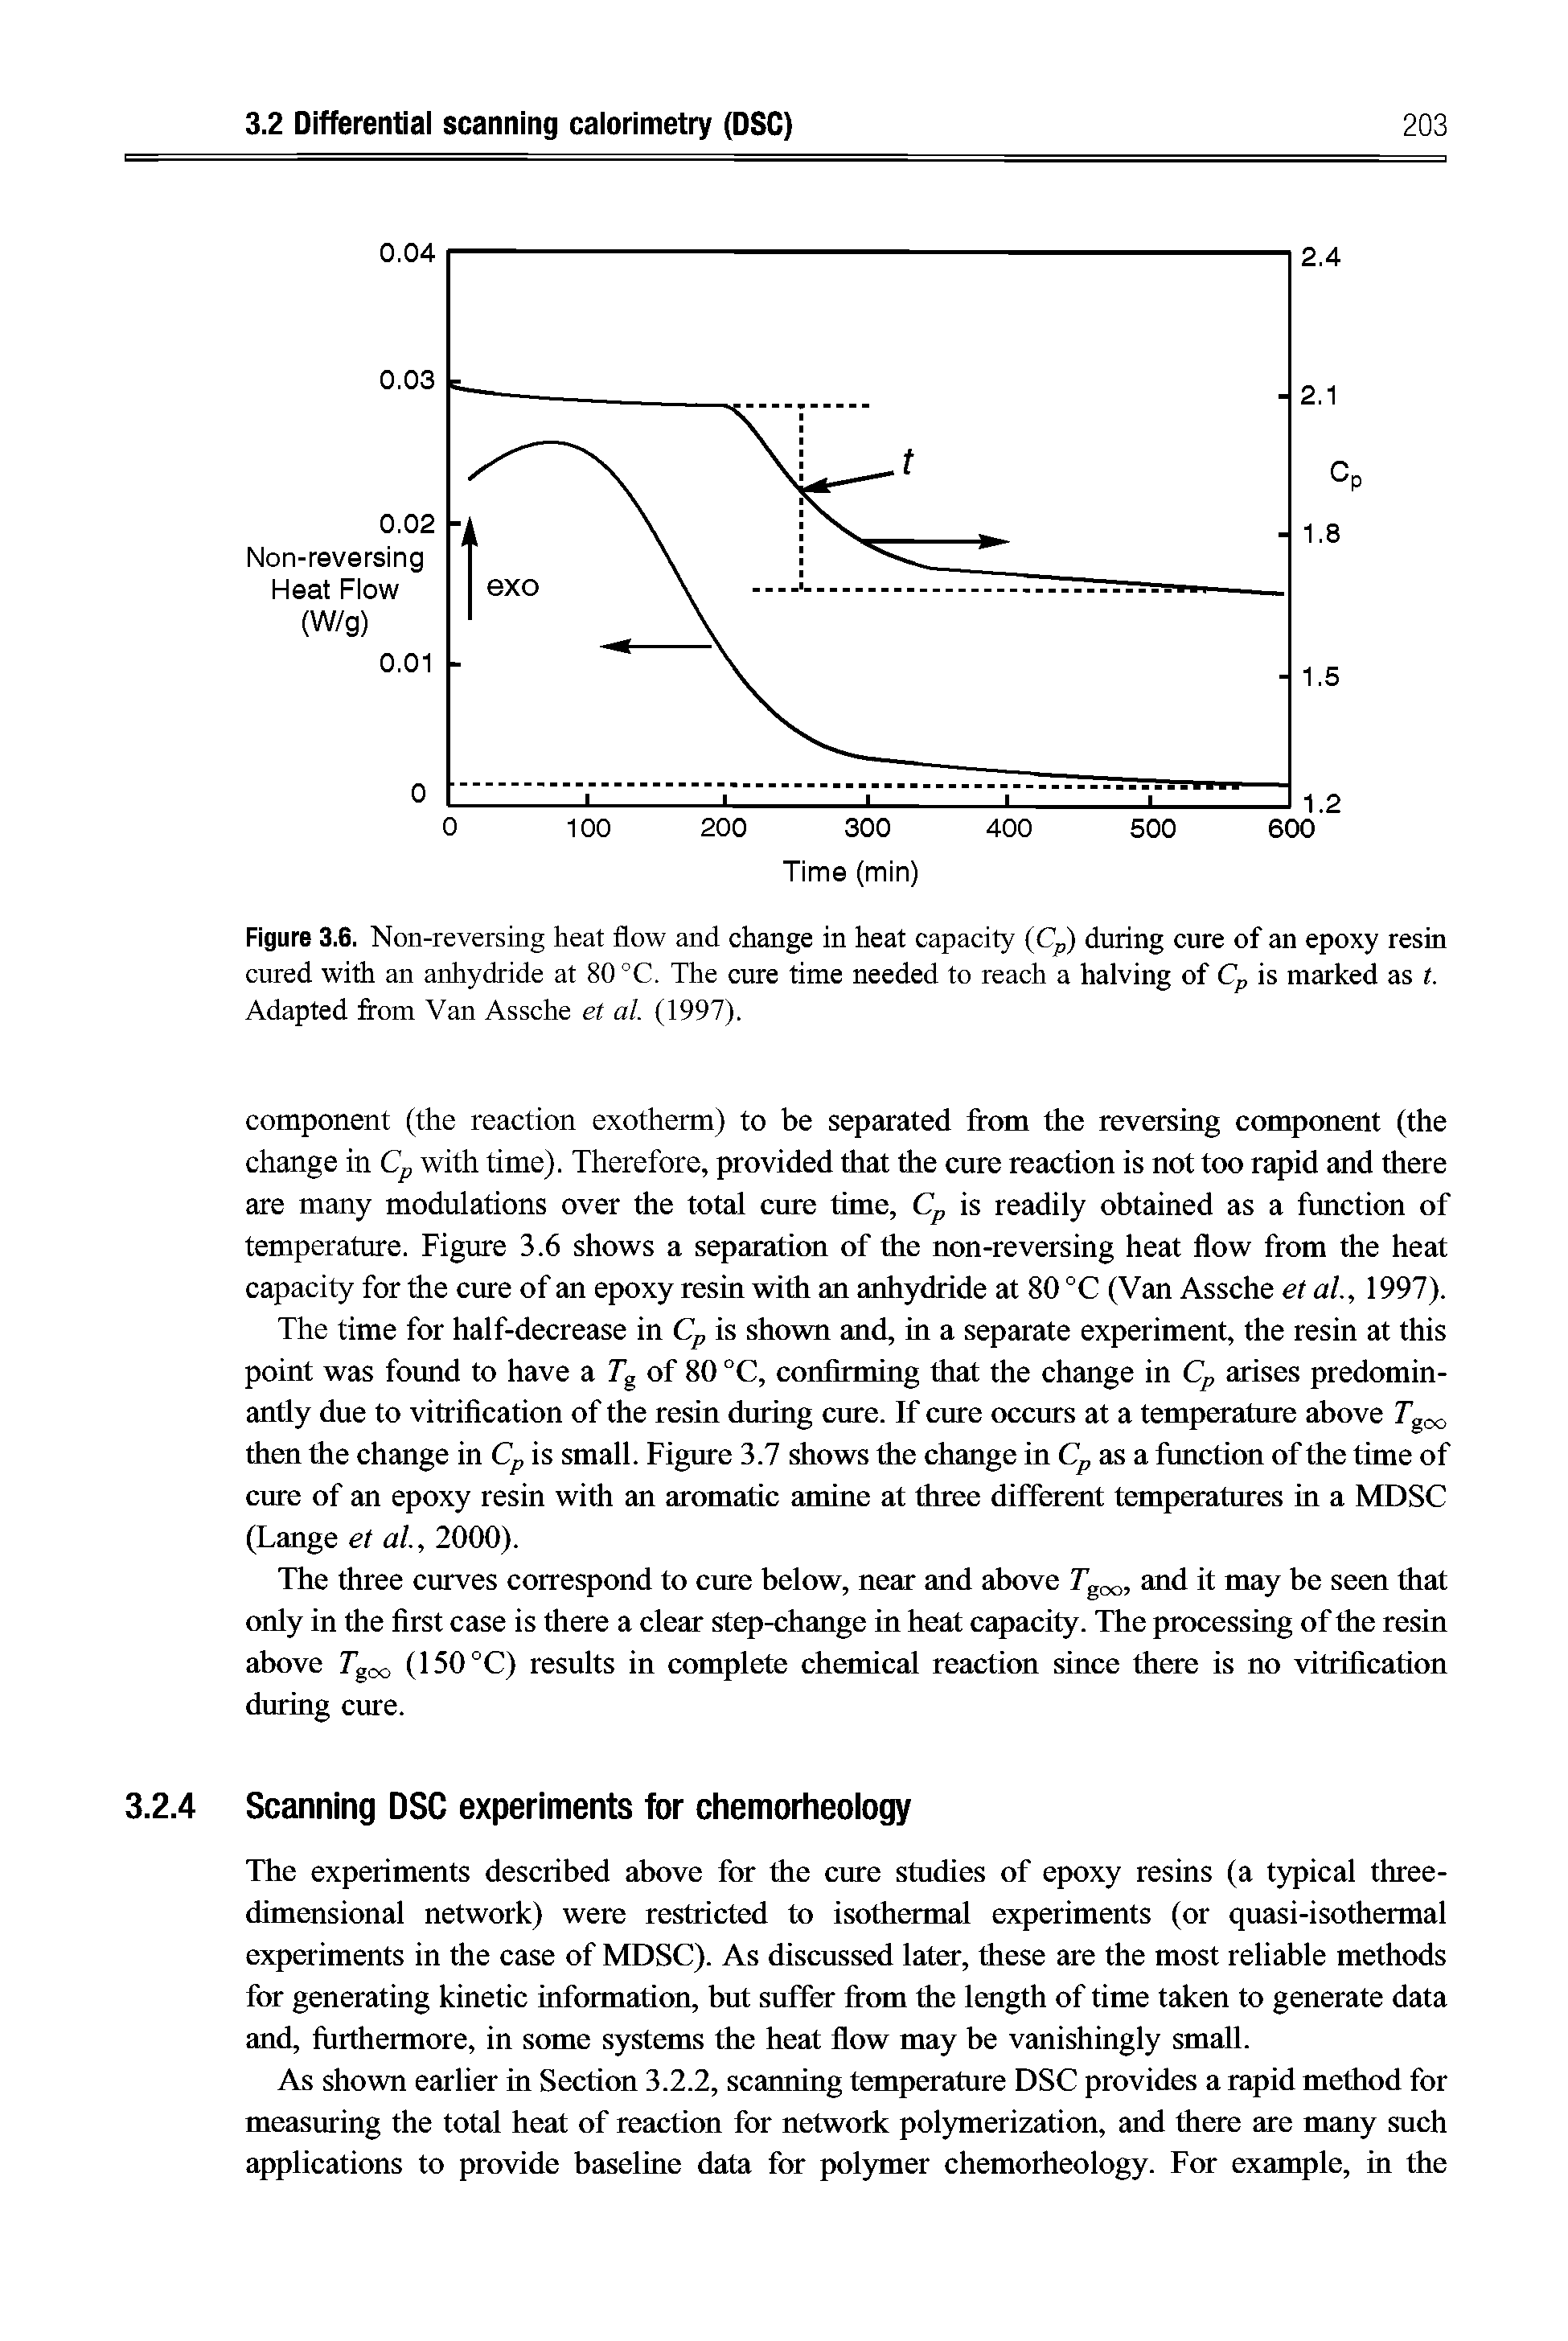 Figure 3.6. Non-reversing heat flow and change in heat capacity (C ) during cure of an epoxy resin cured with an anhydride at 80 °C. The cure time needed to reach a halving of Cp is marked as t. Adapted from Van Assche et al. (1997).